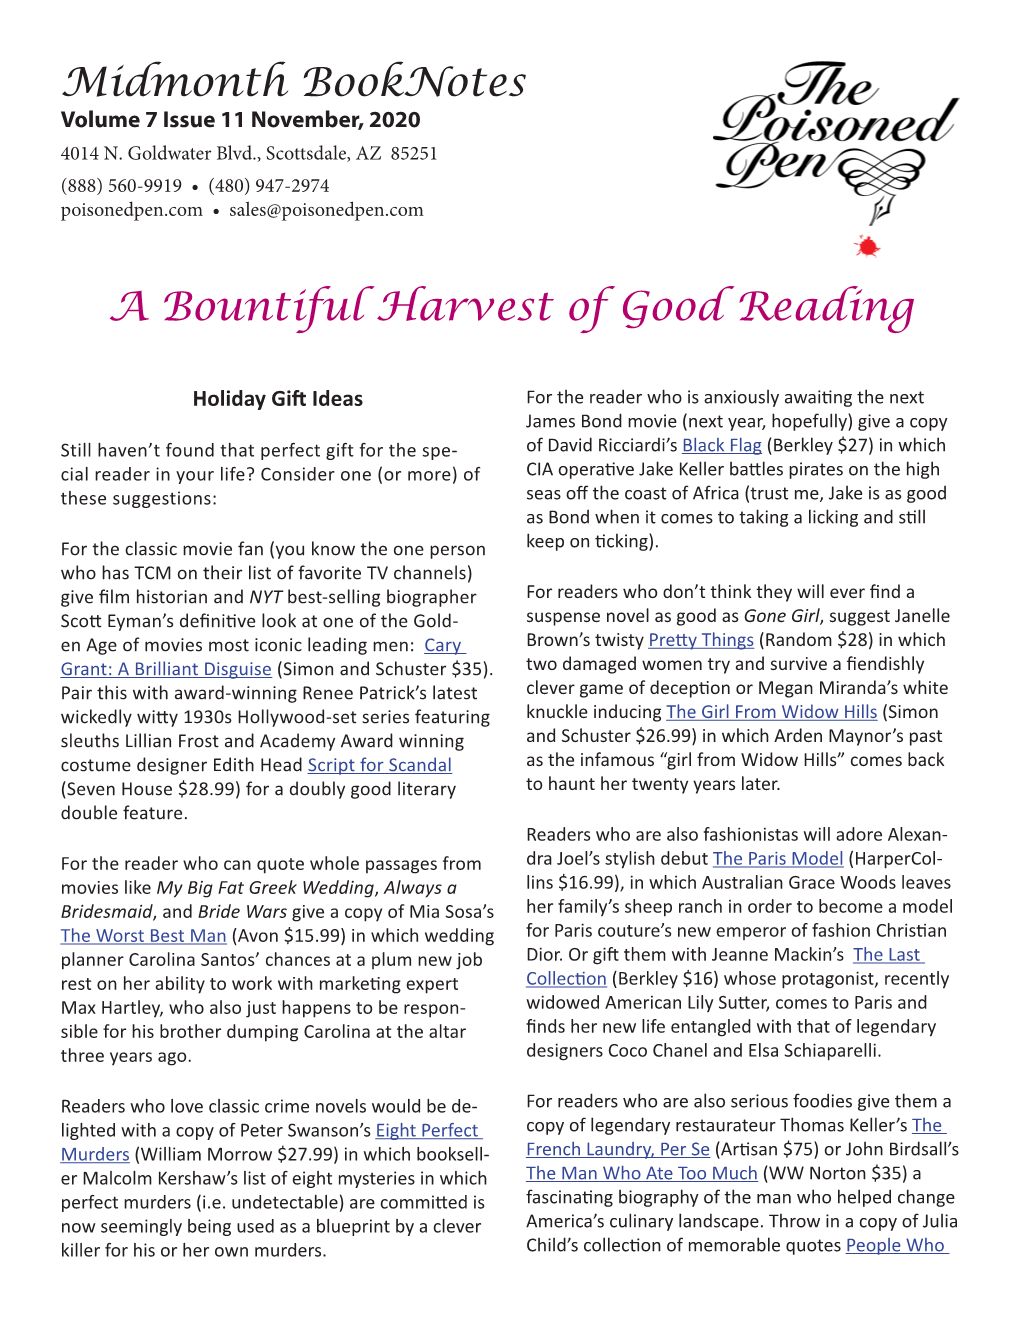 Midmonth Booknotes a Bountiful Harvest of Good Reading